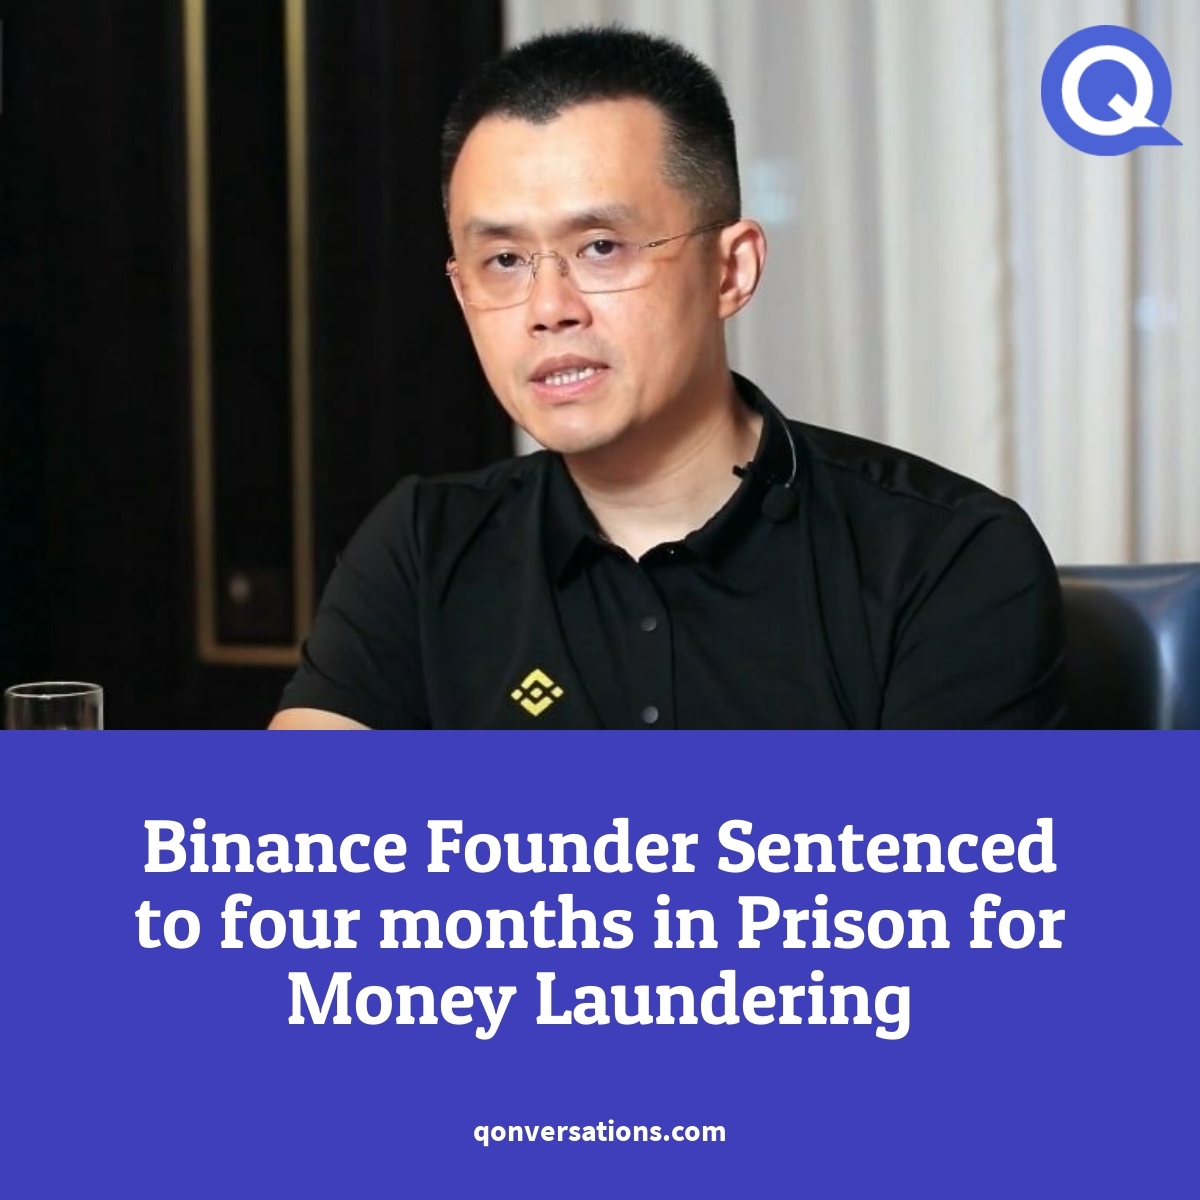 The world’s largest #crypto exchange, Binance, is in hot water as its founder, Changpeng Zhao, has been sentenced to four months in prison in the US for allowing criminals to launder money on the platform. qonversations.com/binance-founde…